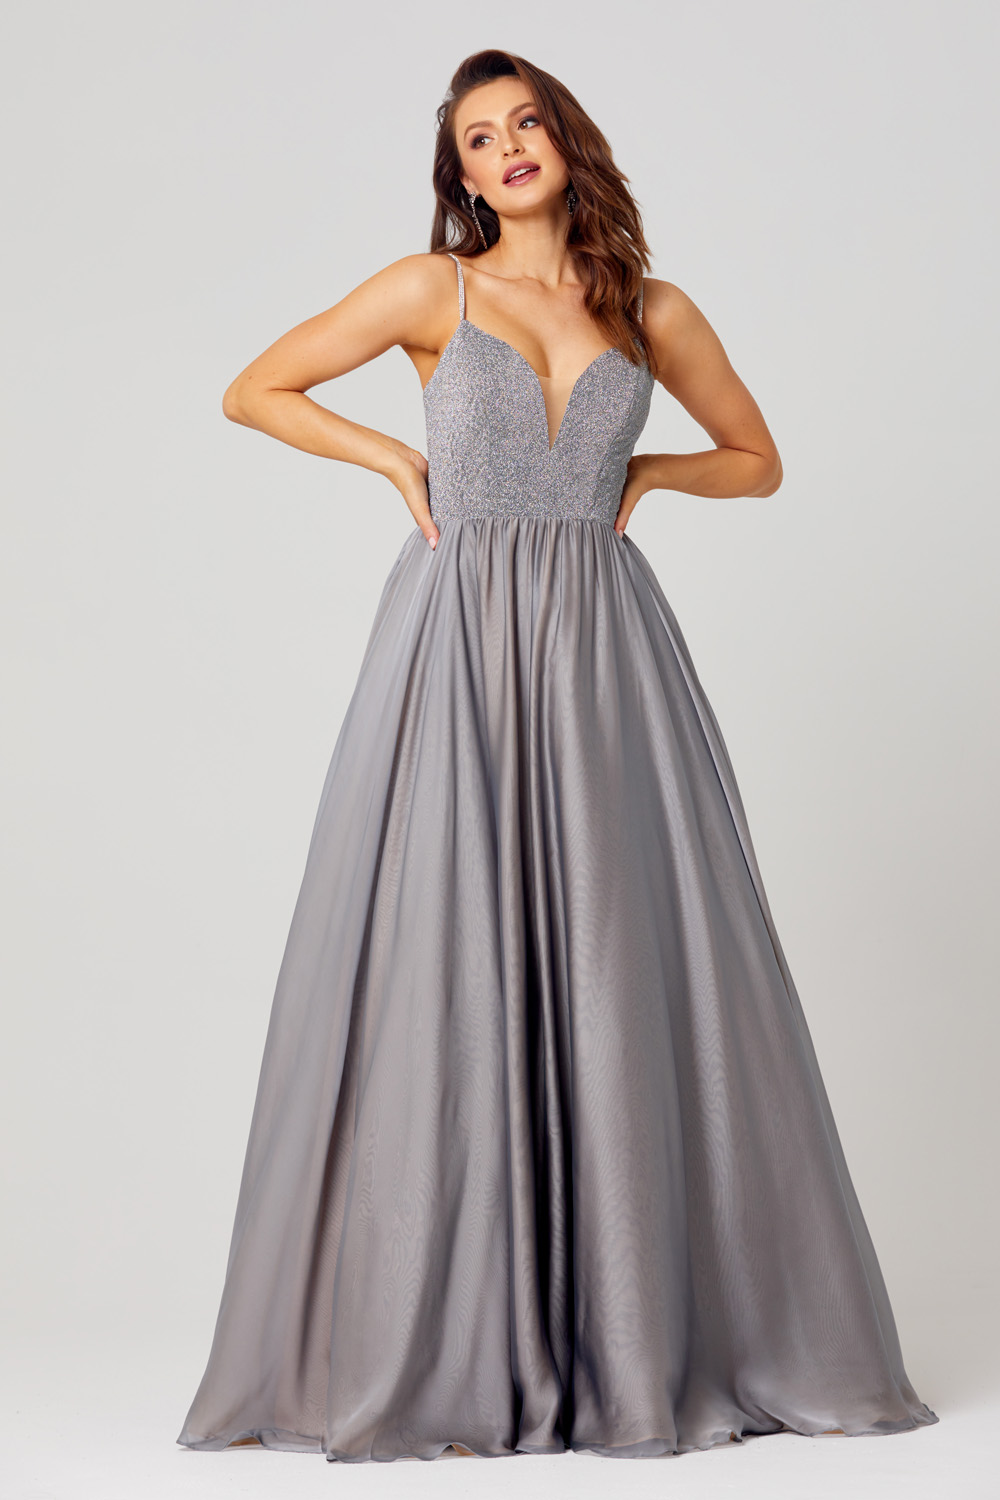 ball gown Perth